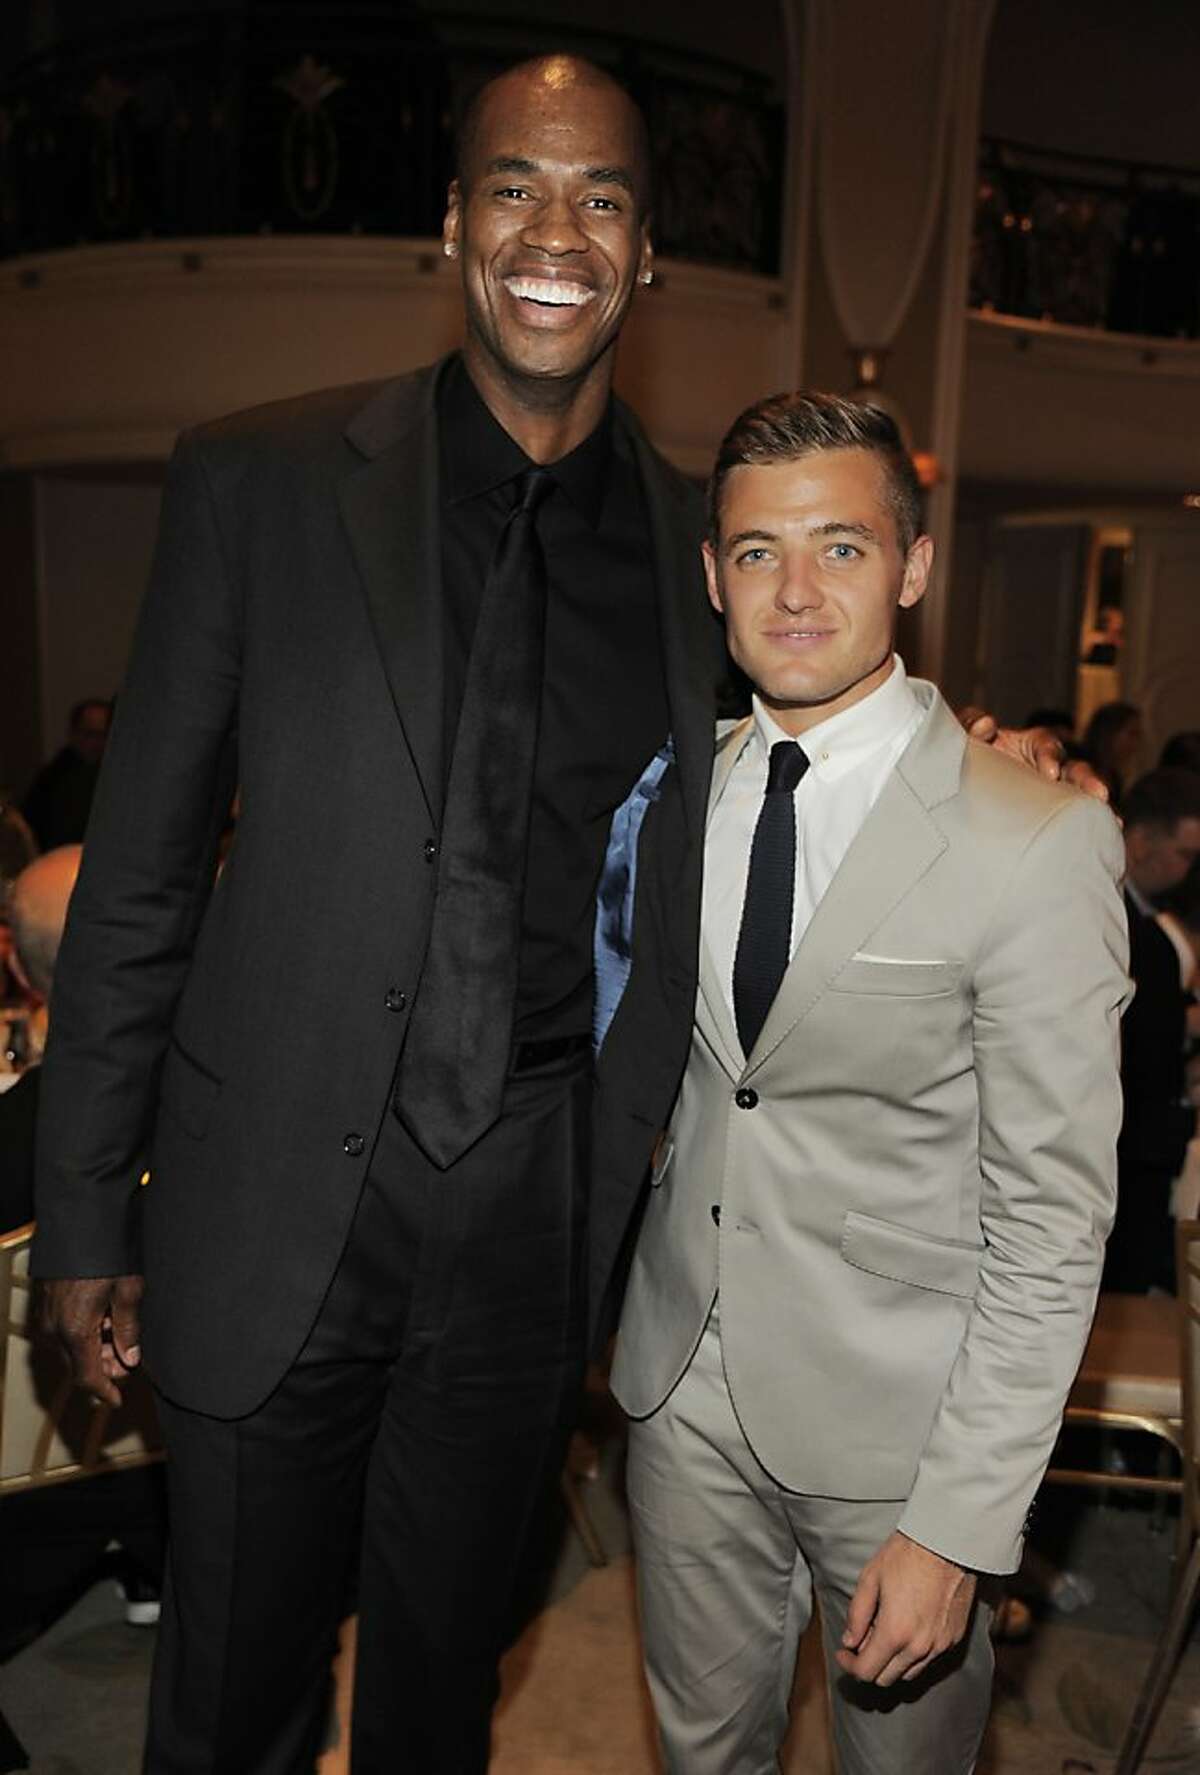 NBA basketball player Jason Collins, left, and Los Angeles Galaxy soccer player Robbie Rogers pose together at the 9th Annual Gay, Lesbian & Straight Education Network Respect Awards at The Beverly Hills Hotel on Friday, Oct. 18, 2013 in Beverly Hills, Calif. (Photo by Chris Pizzello/Invision/AP)